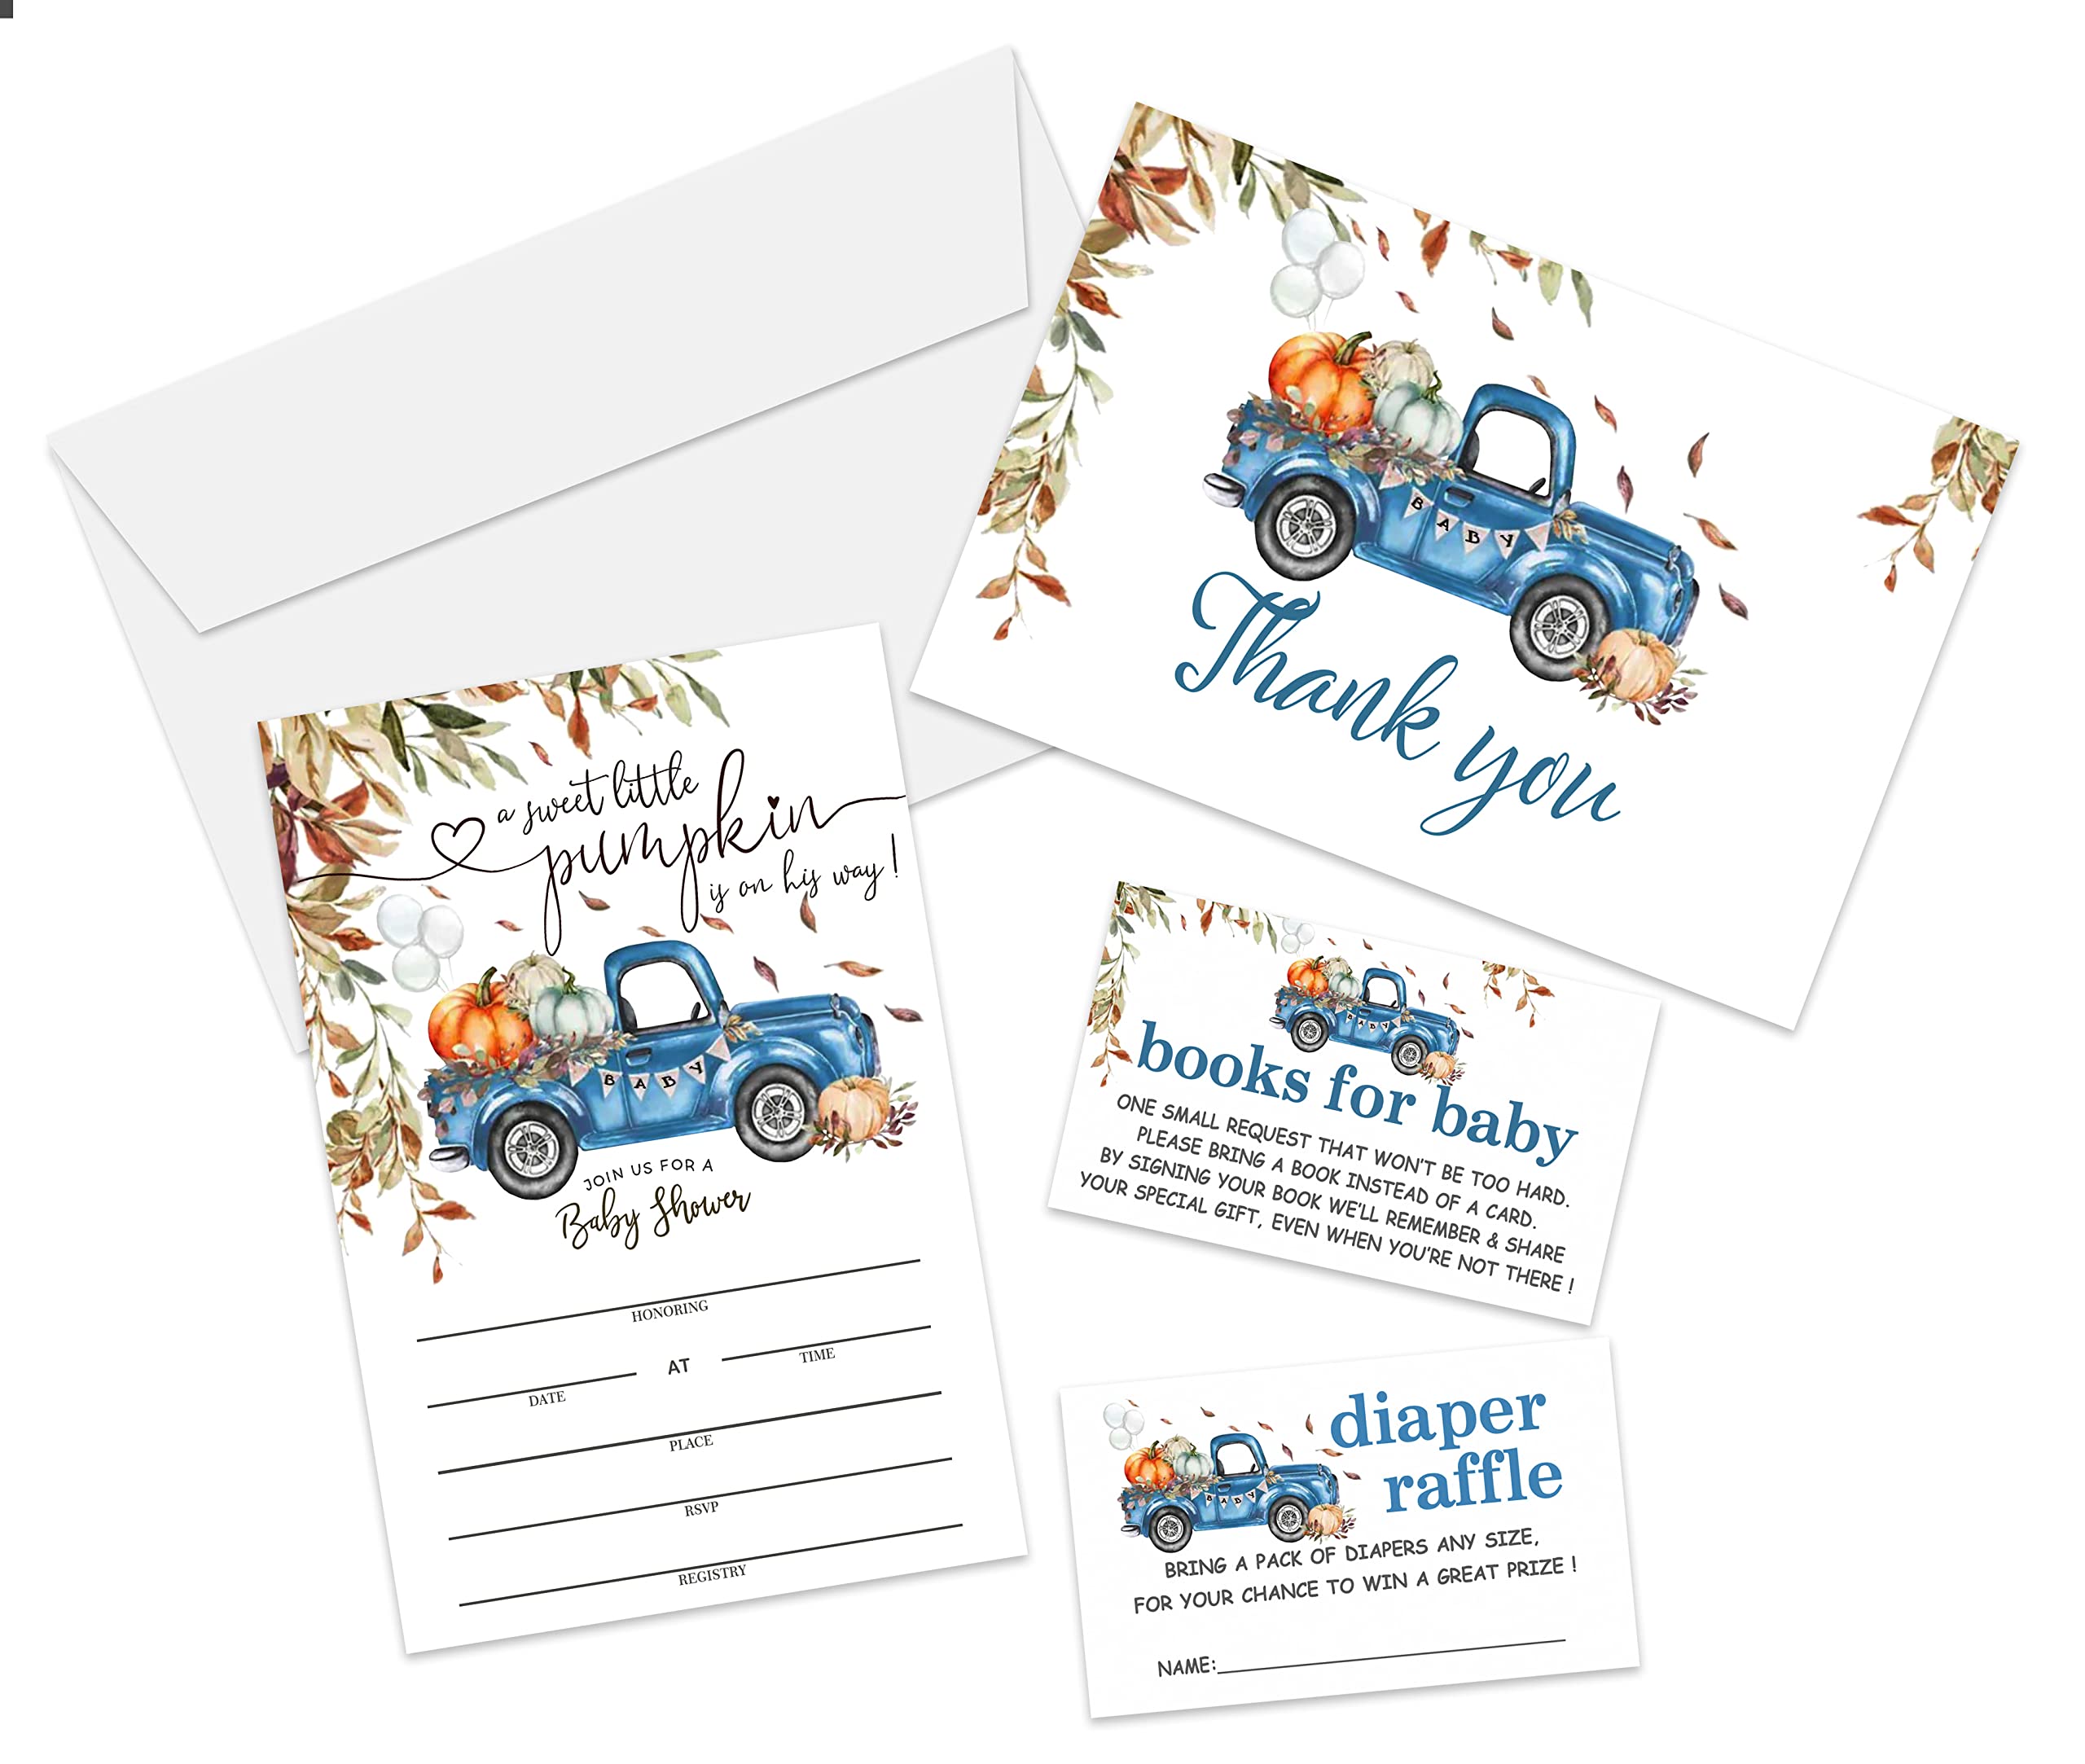 Baby Shower Invitation Set, Books For Baby, Thank You, Diaper Raffle, Fill In Invites Cards, Each Design 25 Cards & Envelopes (Total 100 Cards) – (bb017-taozhuang)